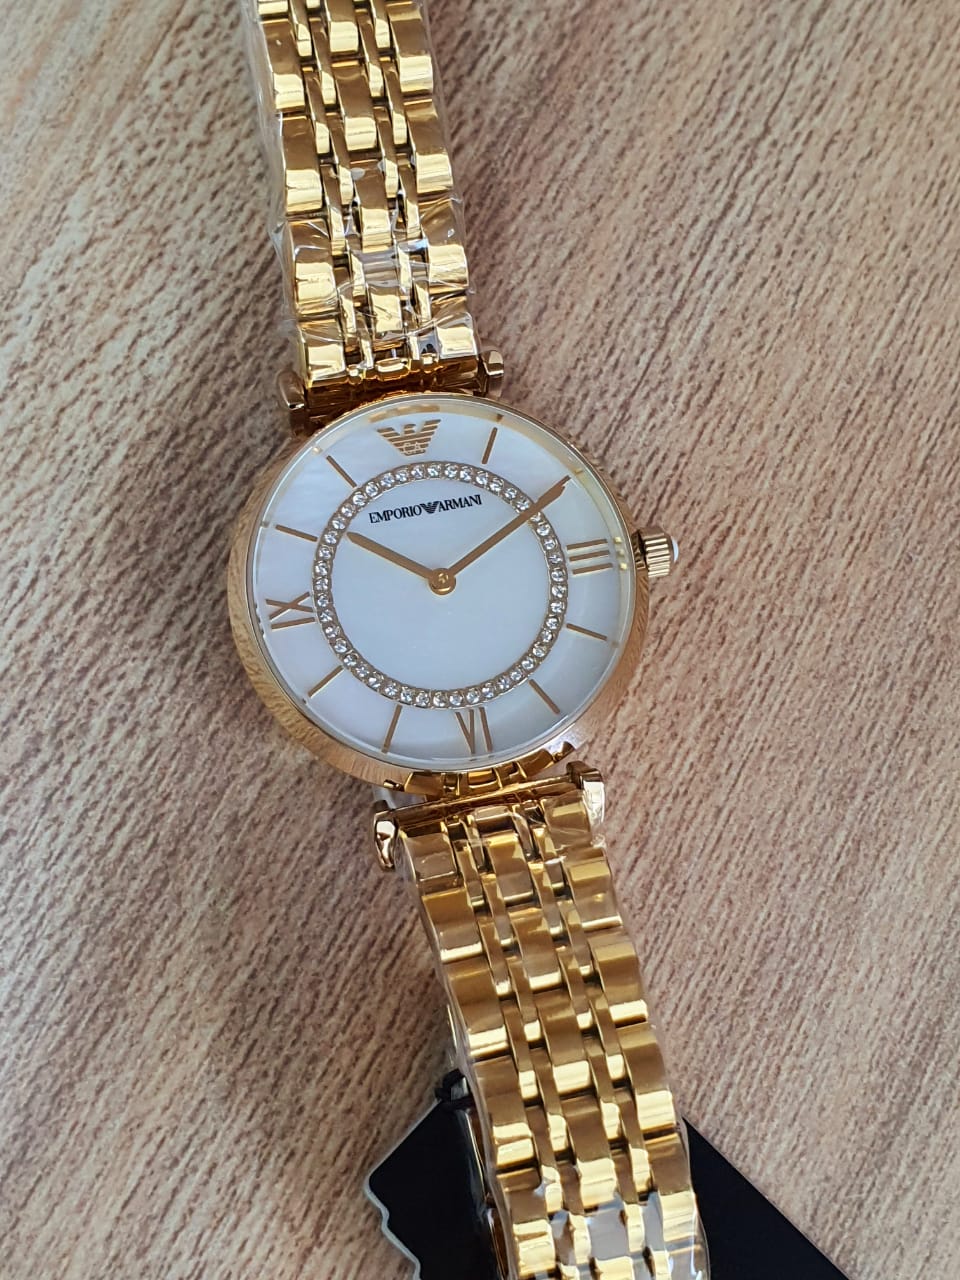 Emporio Armani Gianni T Bar White Mother of Pearl Dial Gold Steel Strap Watch For Women - AR1907